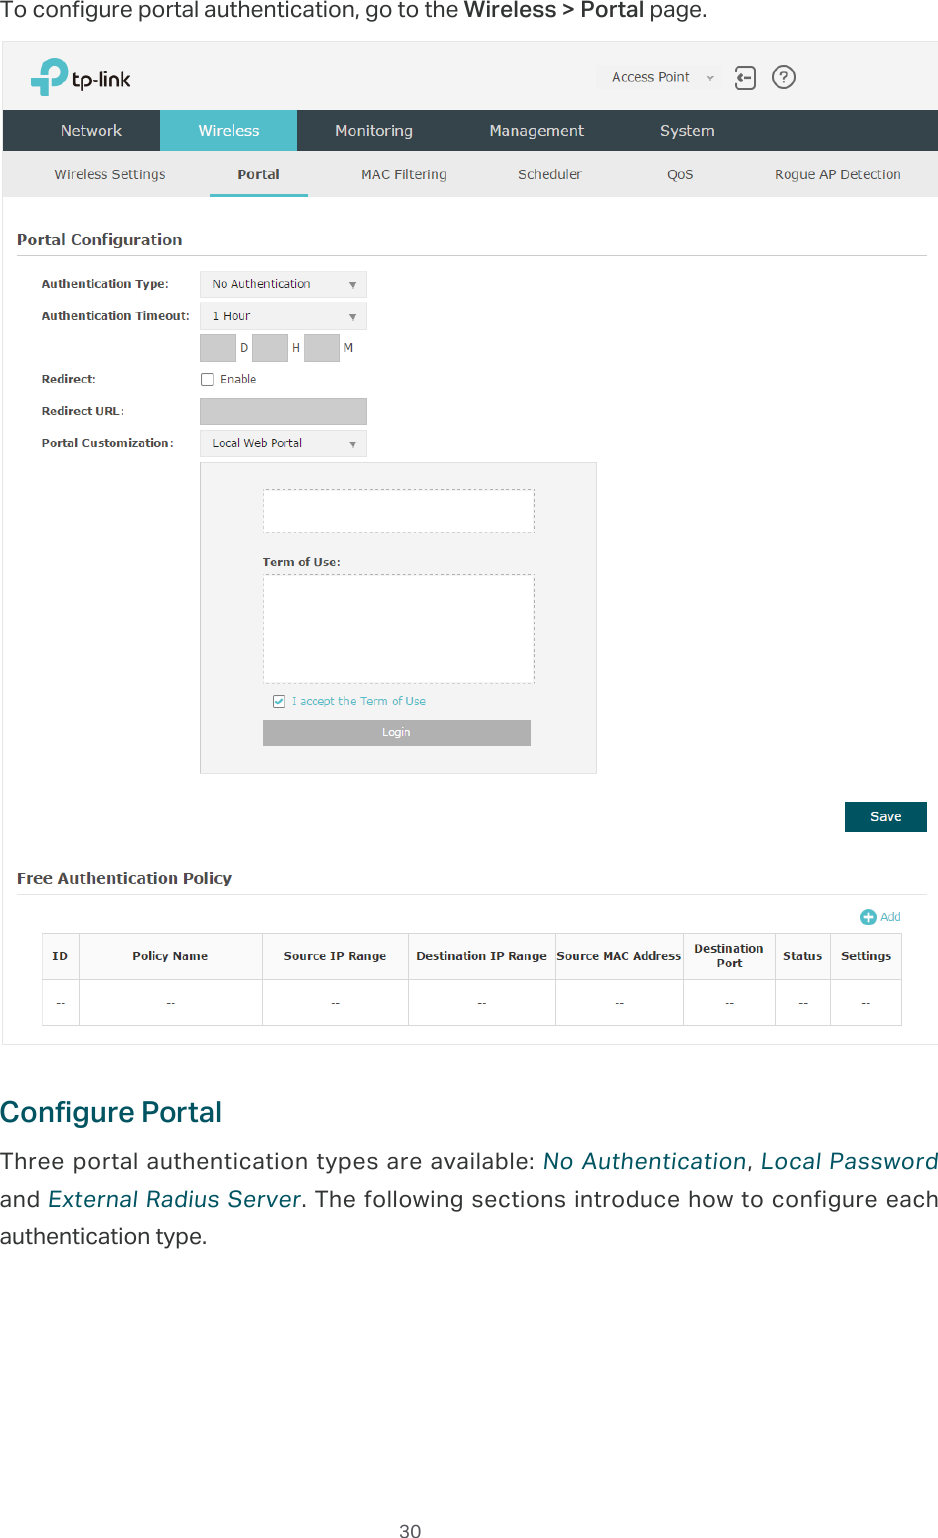  30To configure portal authentication, go to the Wireless &gt; Portal page.Configure PortalThree portal authentication types are available: No Authentication, Local Password and External Radius Server. The following sections introduce how to configure each authentication type.